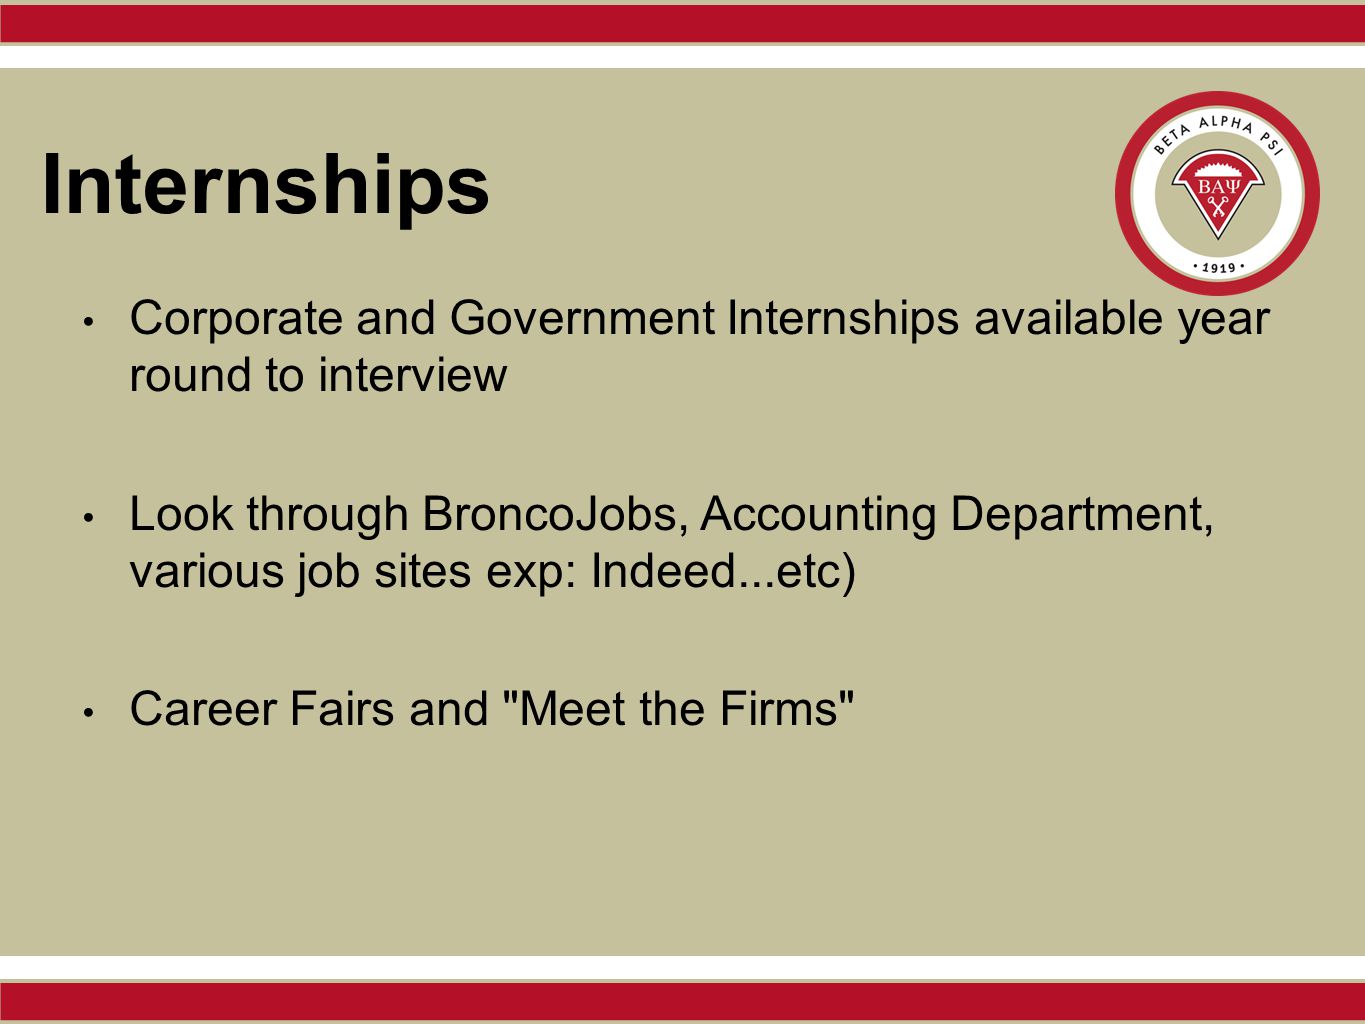 Internships Corporate and Government Internships available year round to interview Look through BroncoJobs, Accounting Department, various job sites exp: Indeed...etc) Career Fairs and Meet the Firms